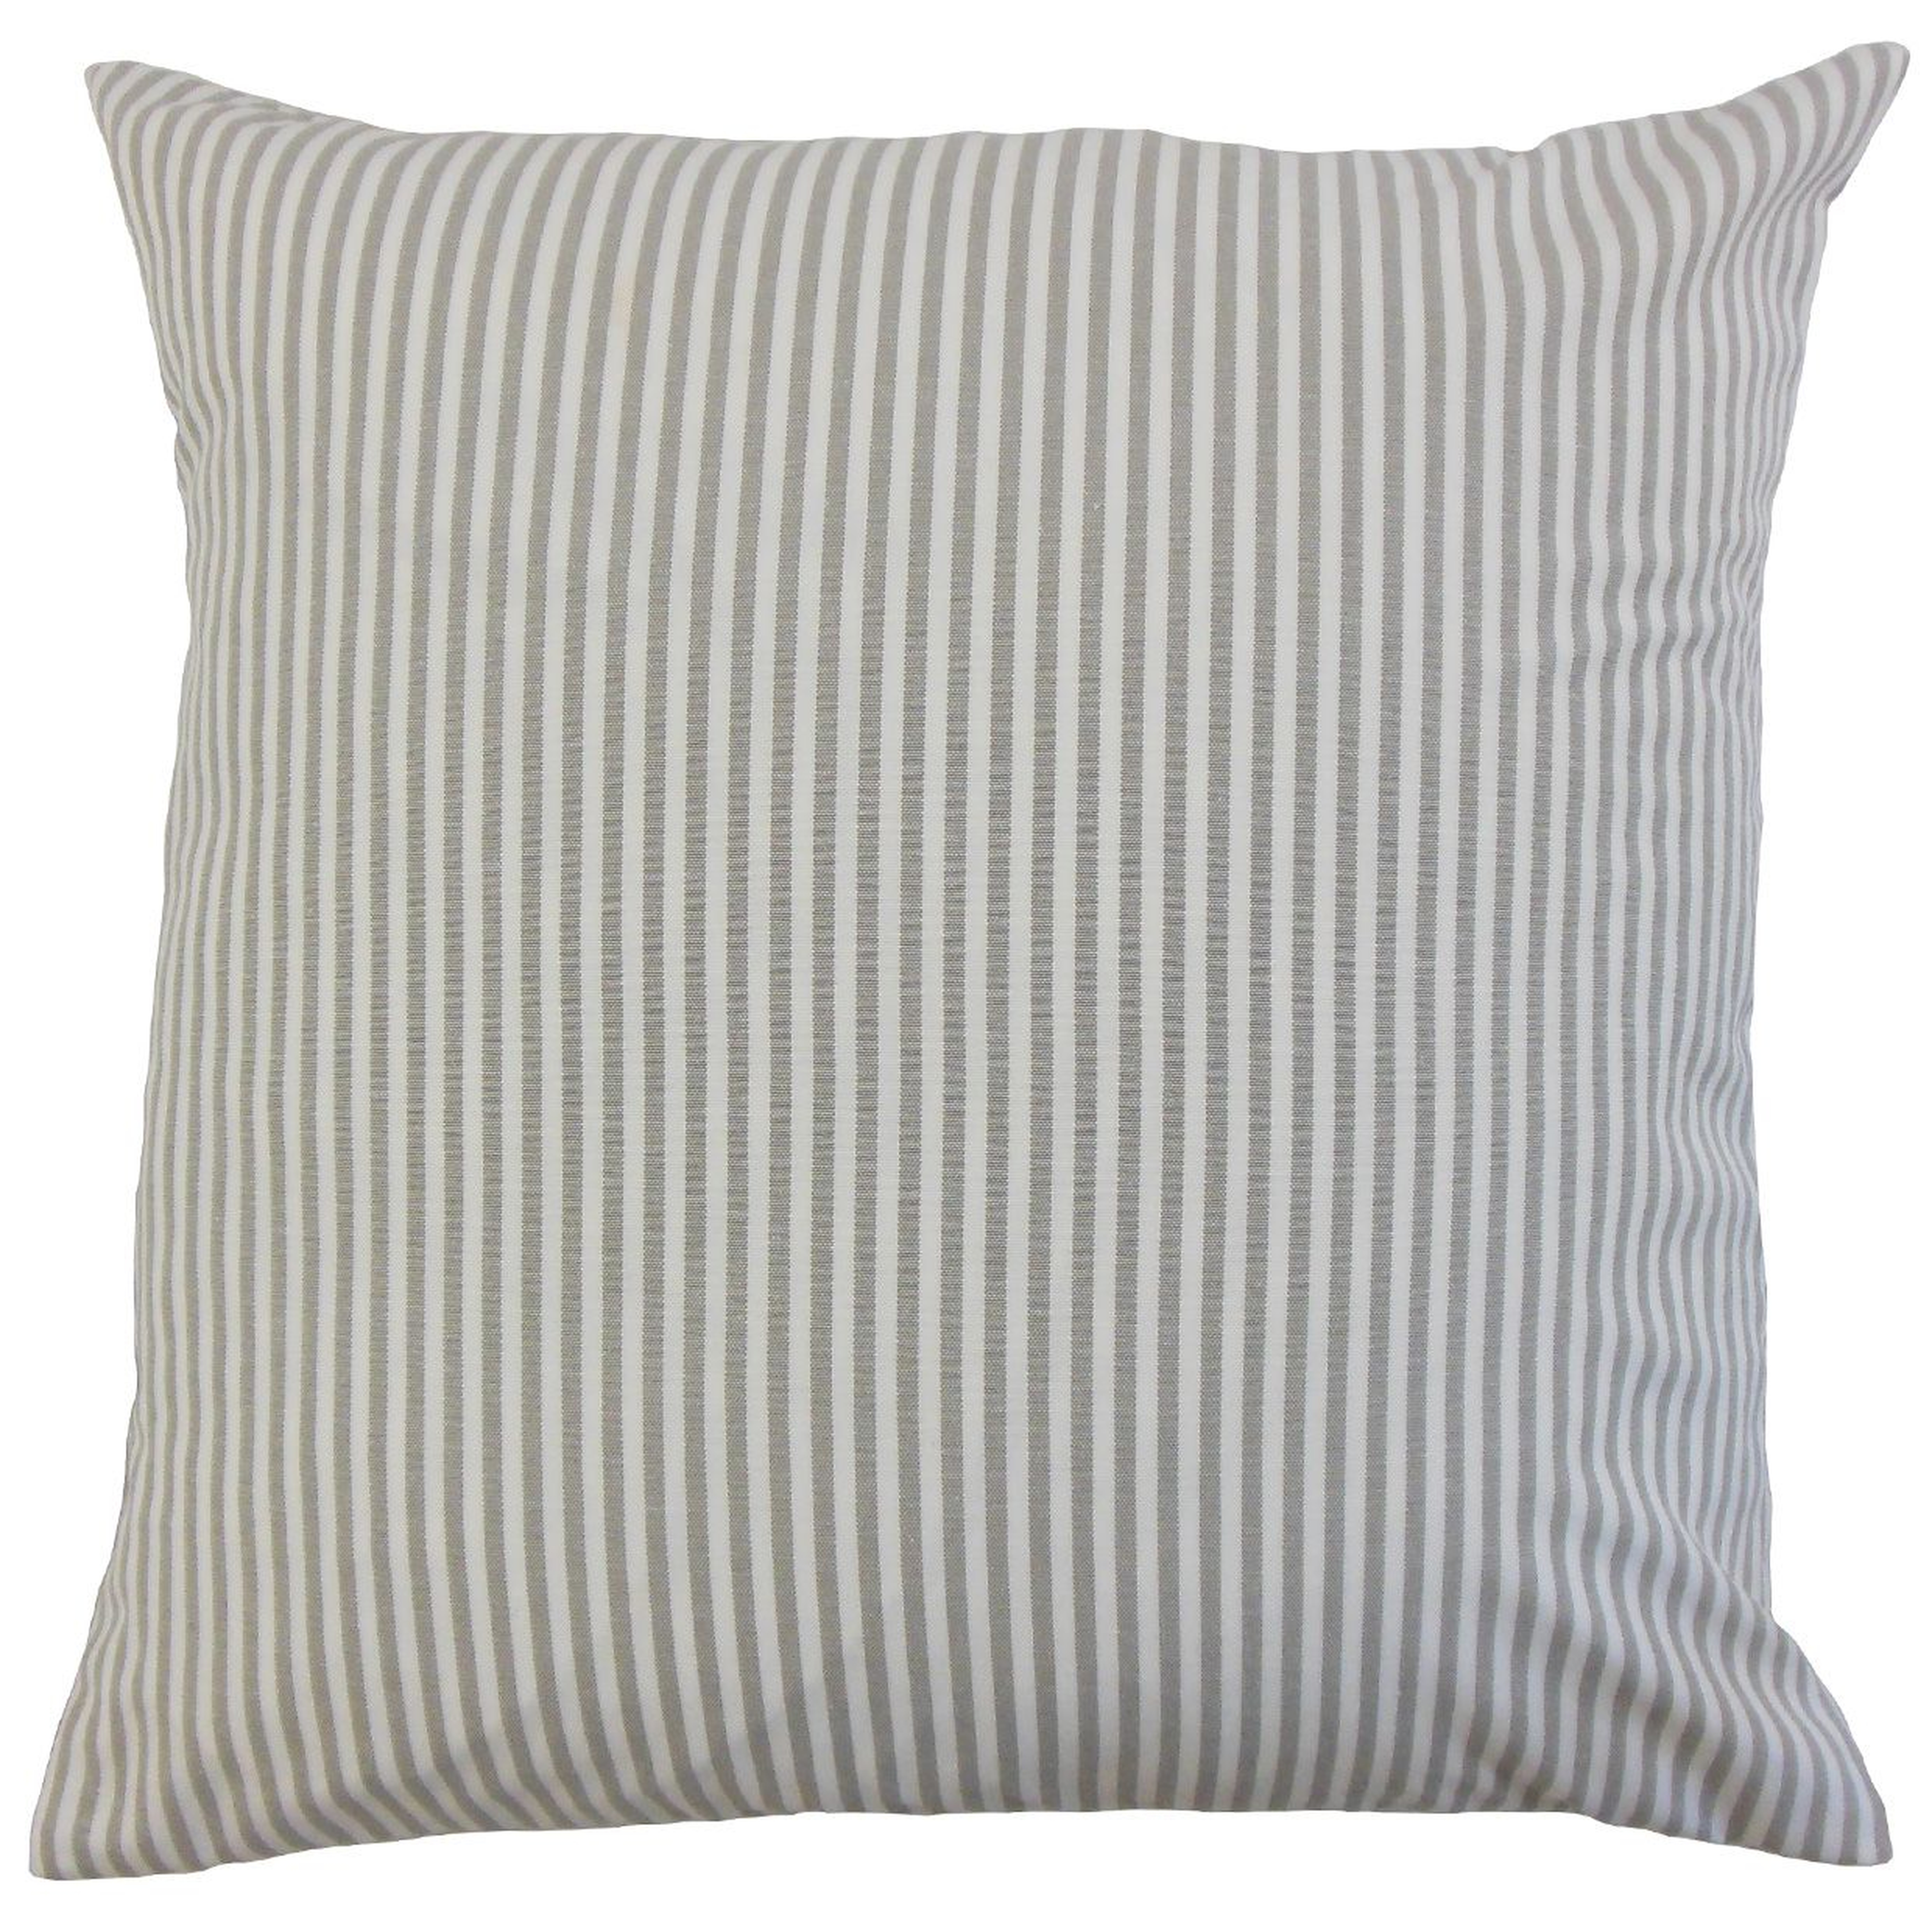 Classic Stripe Pillow, Slate, 18" x 18" - Havenly Essentials